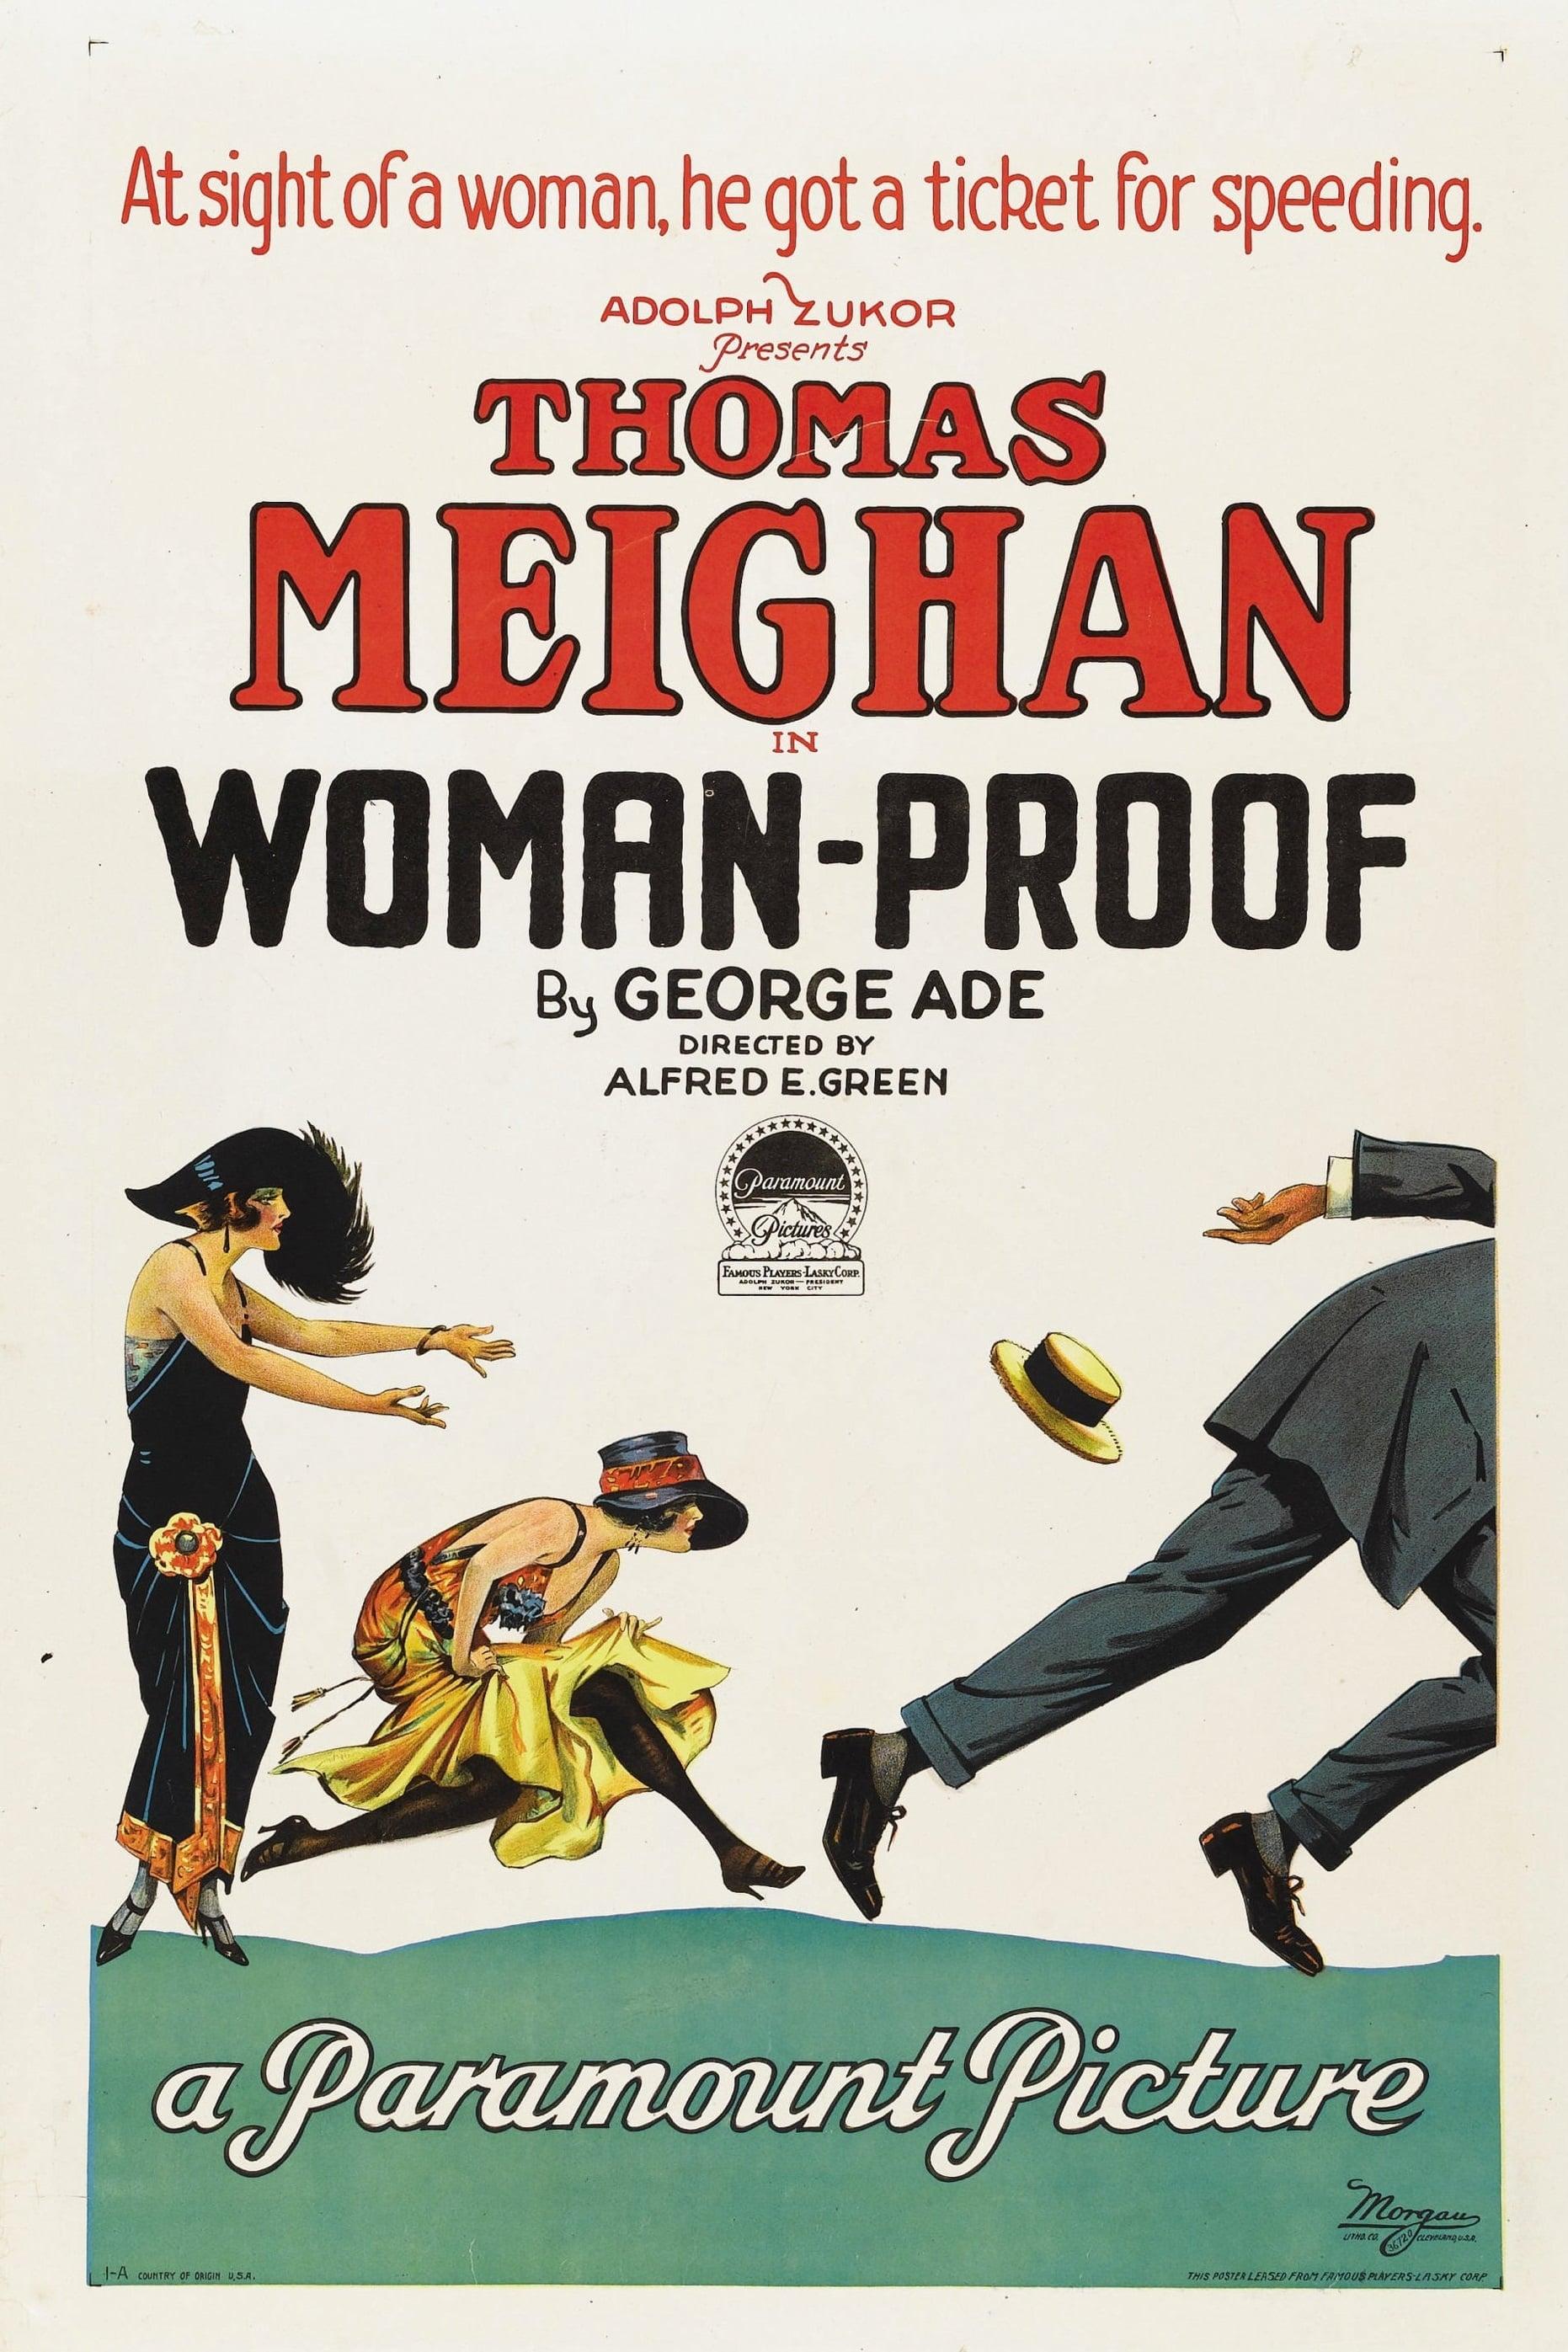 Woman-Proof poster